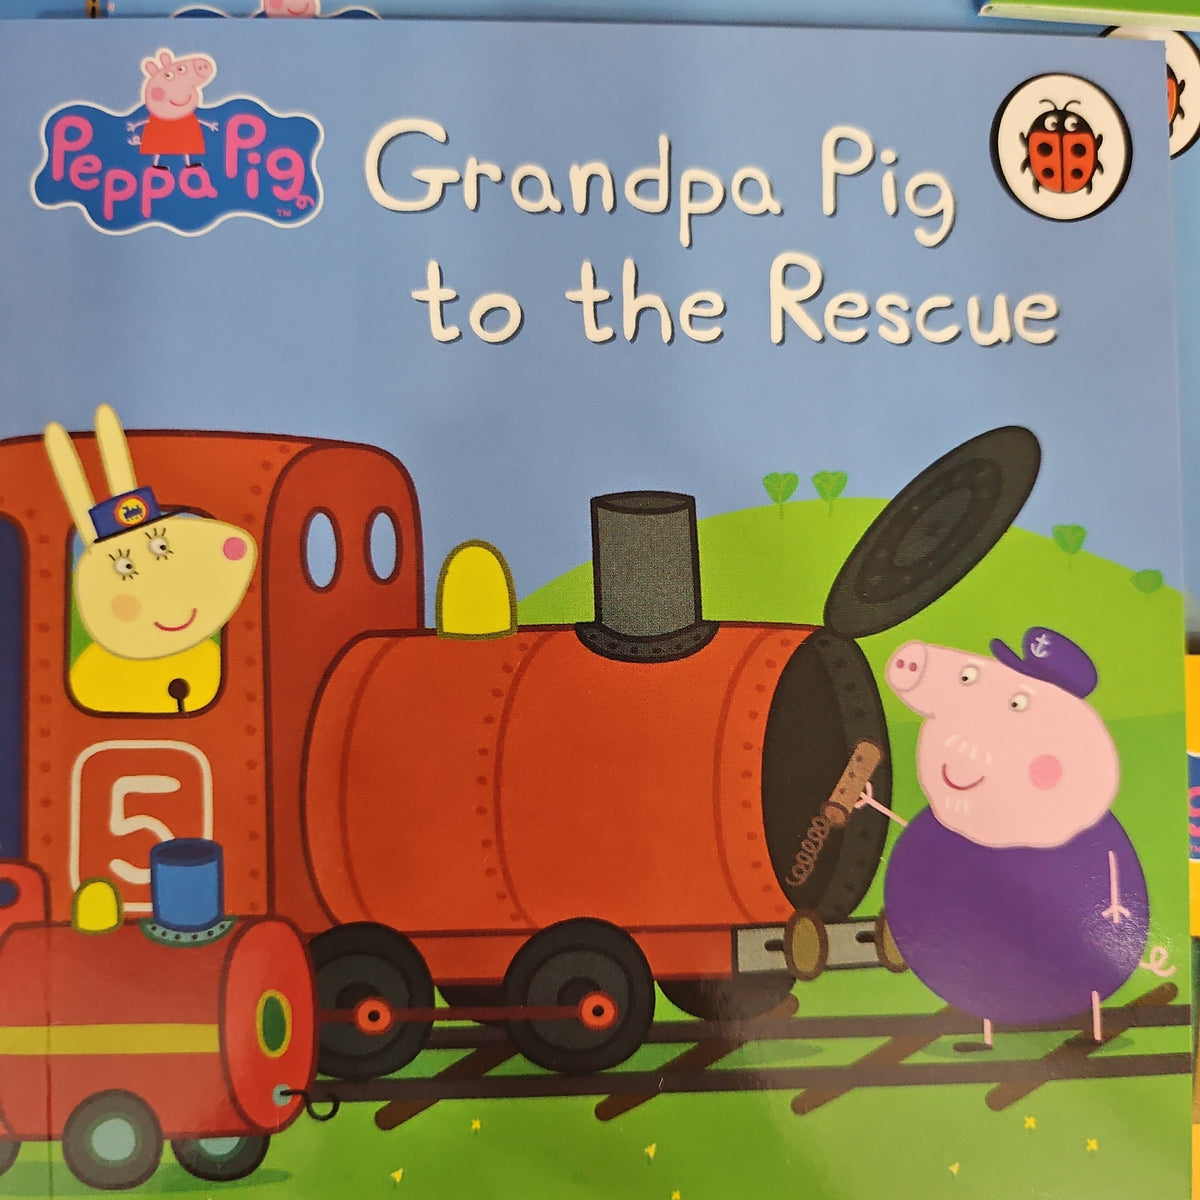 The Incredible Peppa Pig Collection:Grandpa Pig to the Rescue